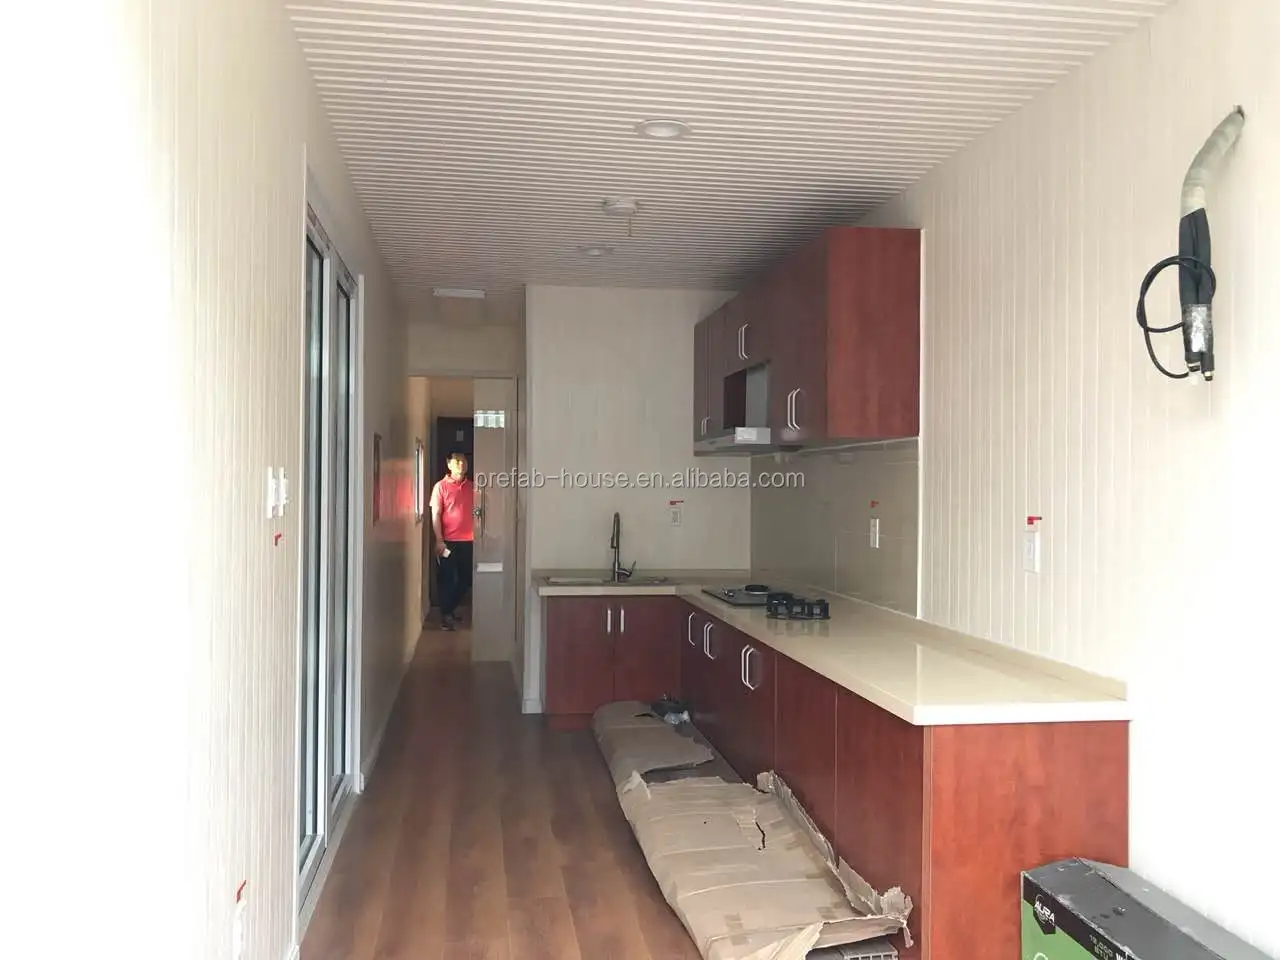 Wholesale best container houses bulk buy used as kitchen, shower room-13